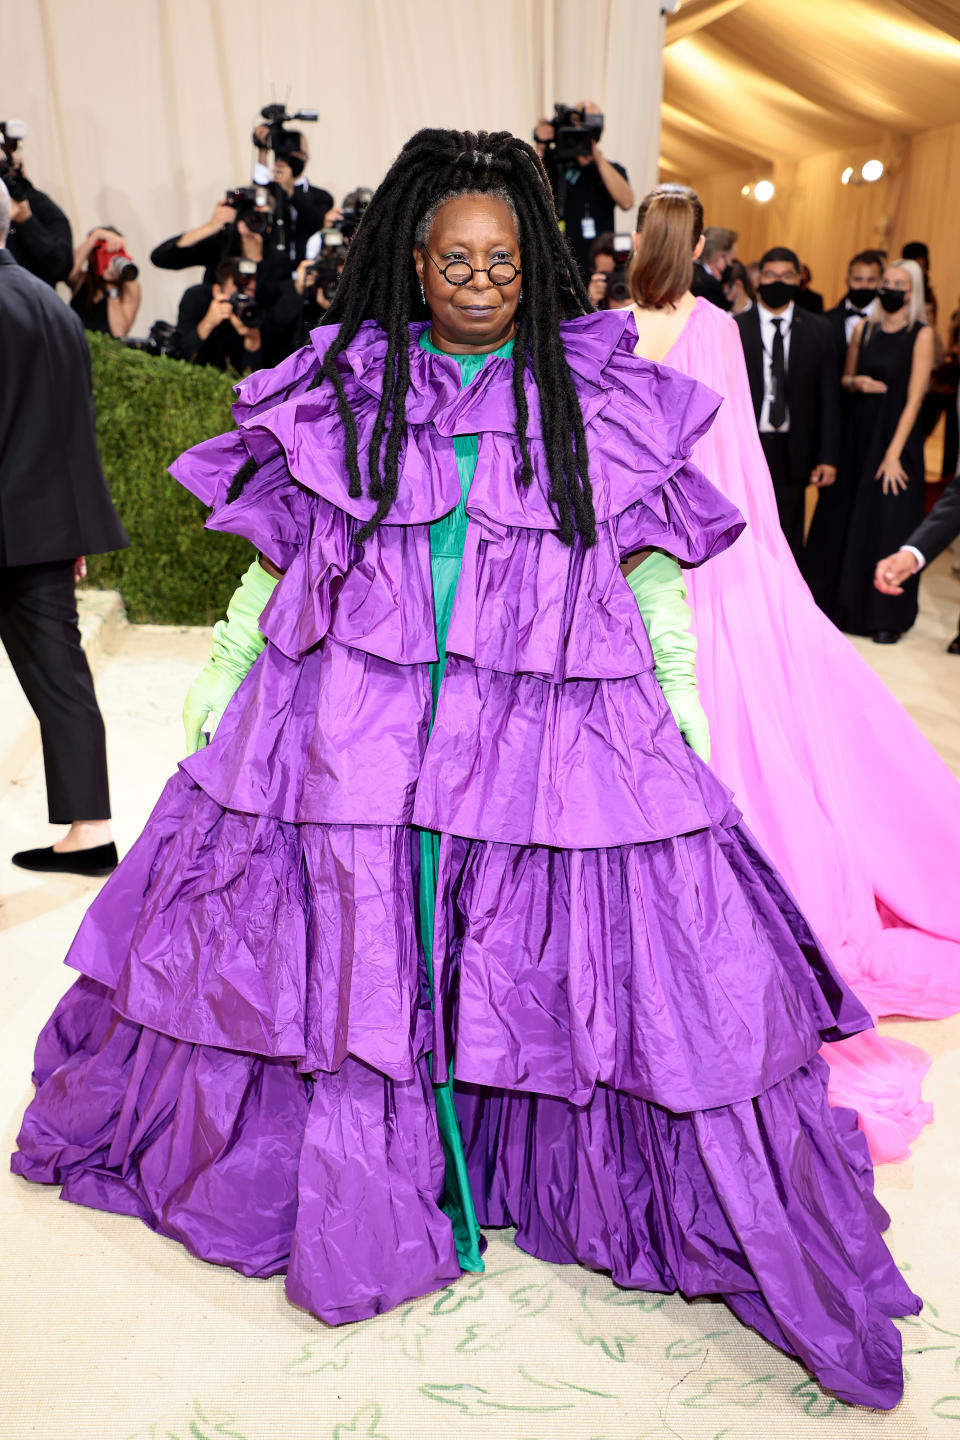 Whoopi Goldberg attends The 2021 Met Gala Celebrating In America: A Lexicon Of Fashion at Metropolitan Museum of Art on September 13, 2021 in New York City. (Getty Images)